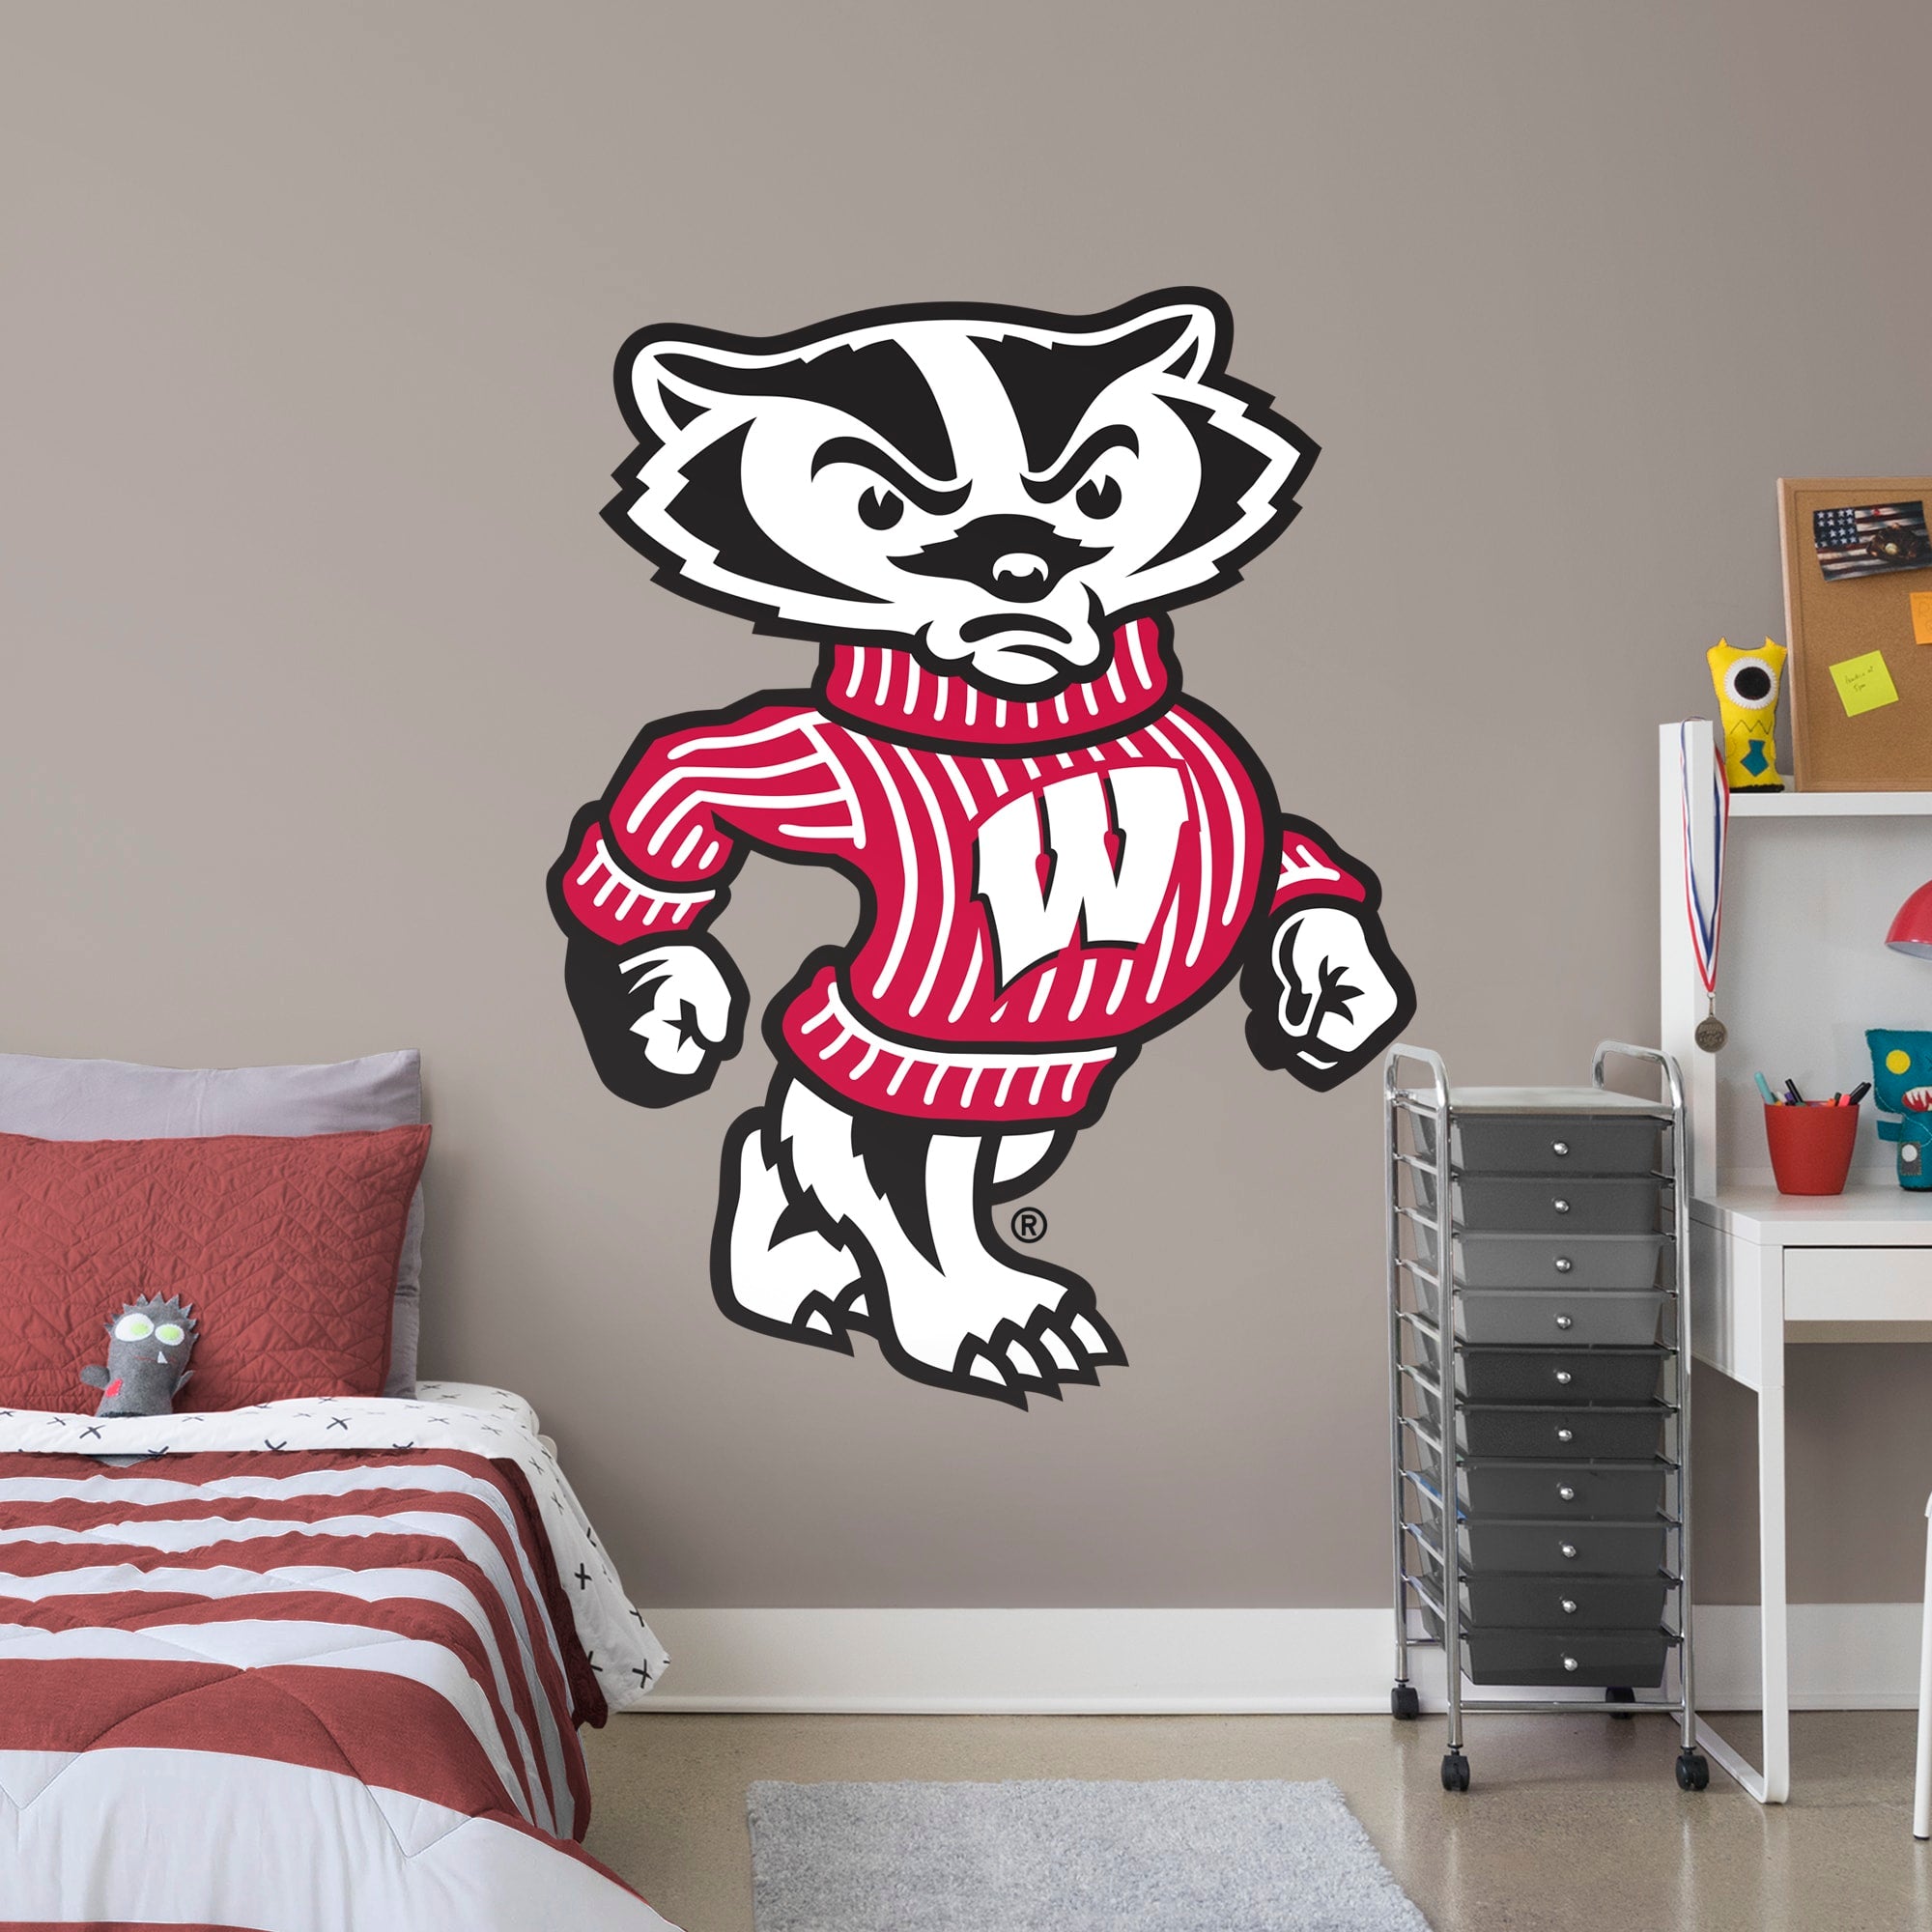 Wisconsin Badgers: Bucky Badger Illustrated Mascot - Officially Licensed Removable Wall Decal Life-Size Mascot + 2 Decals (48"W